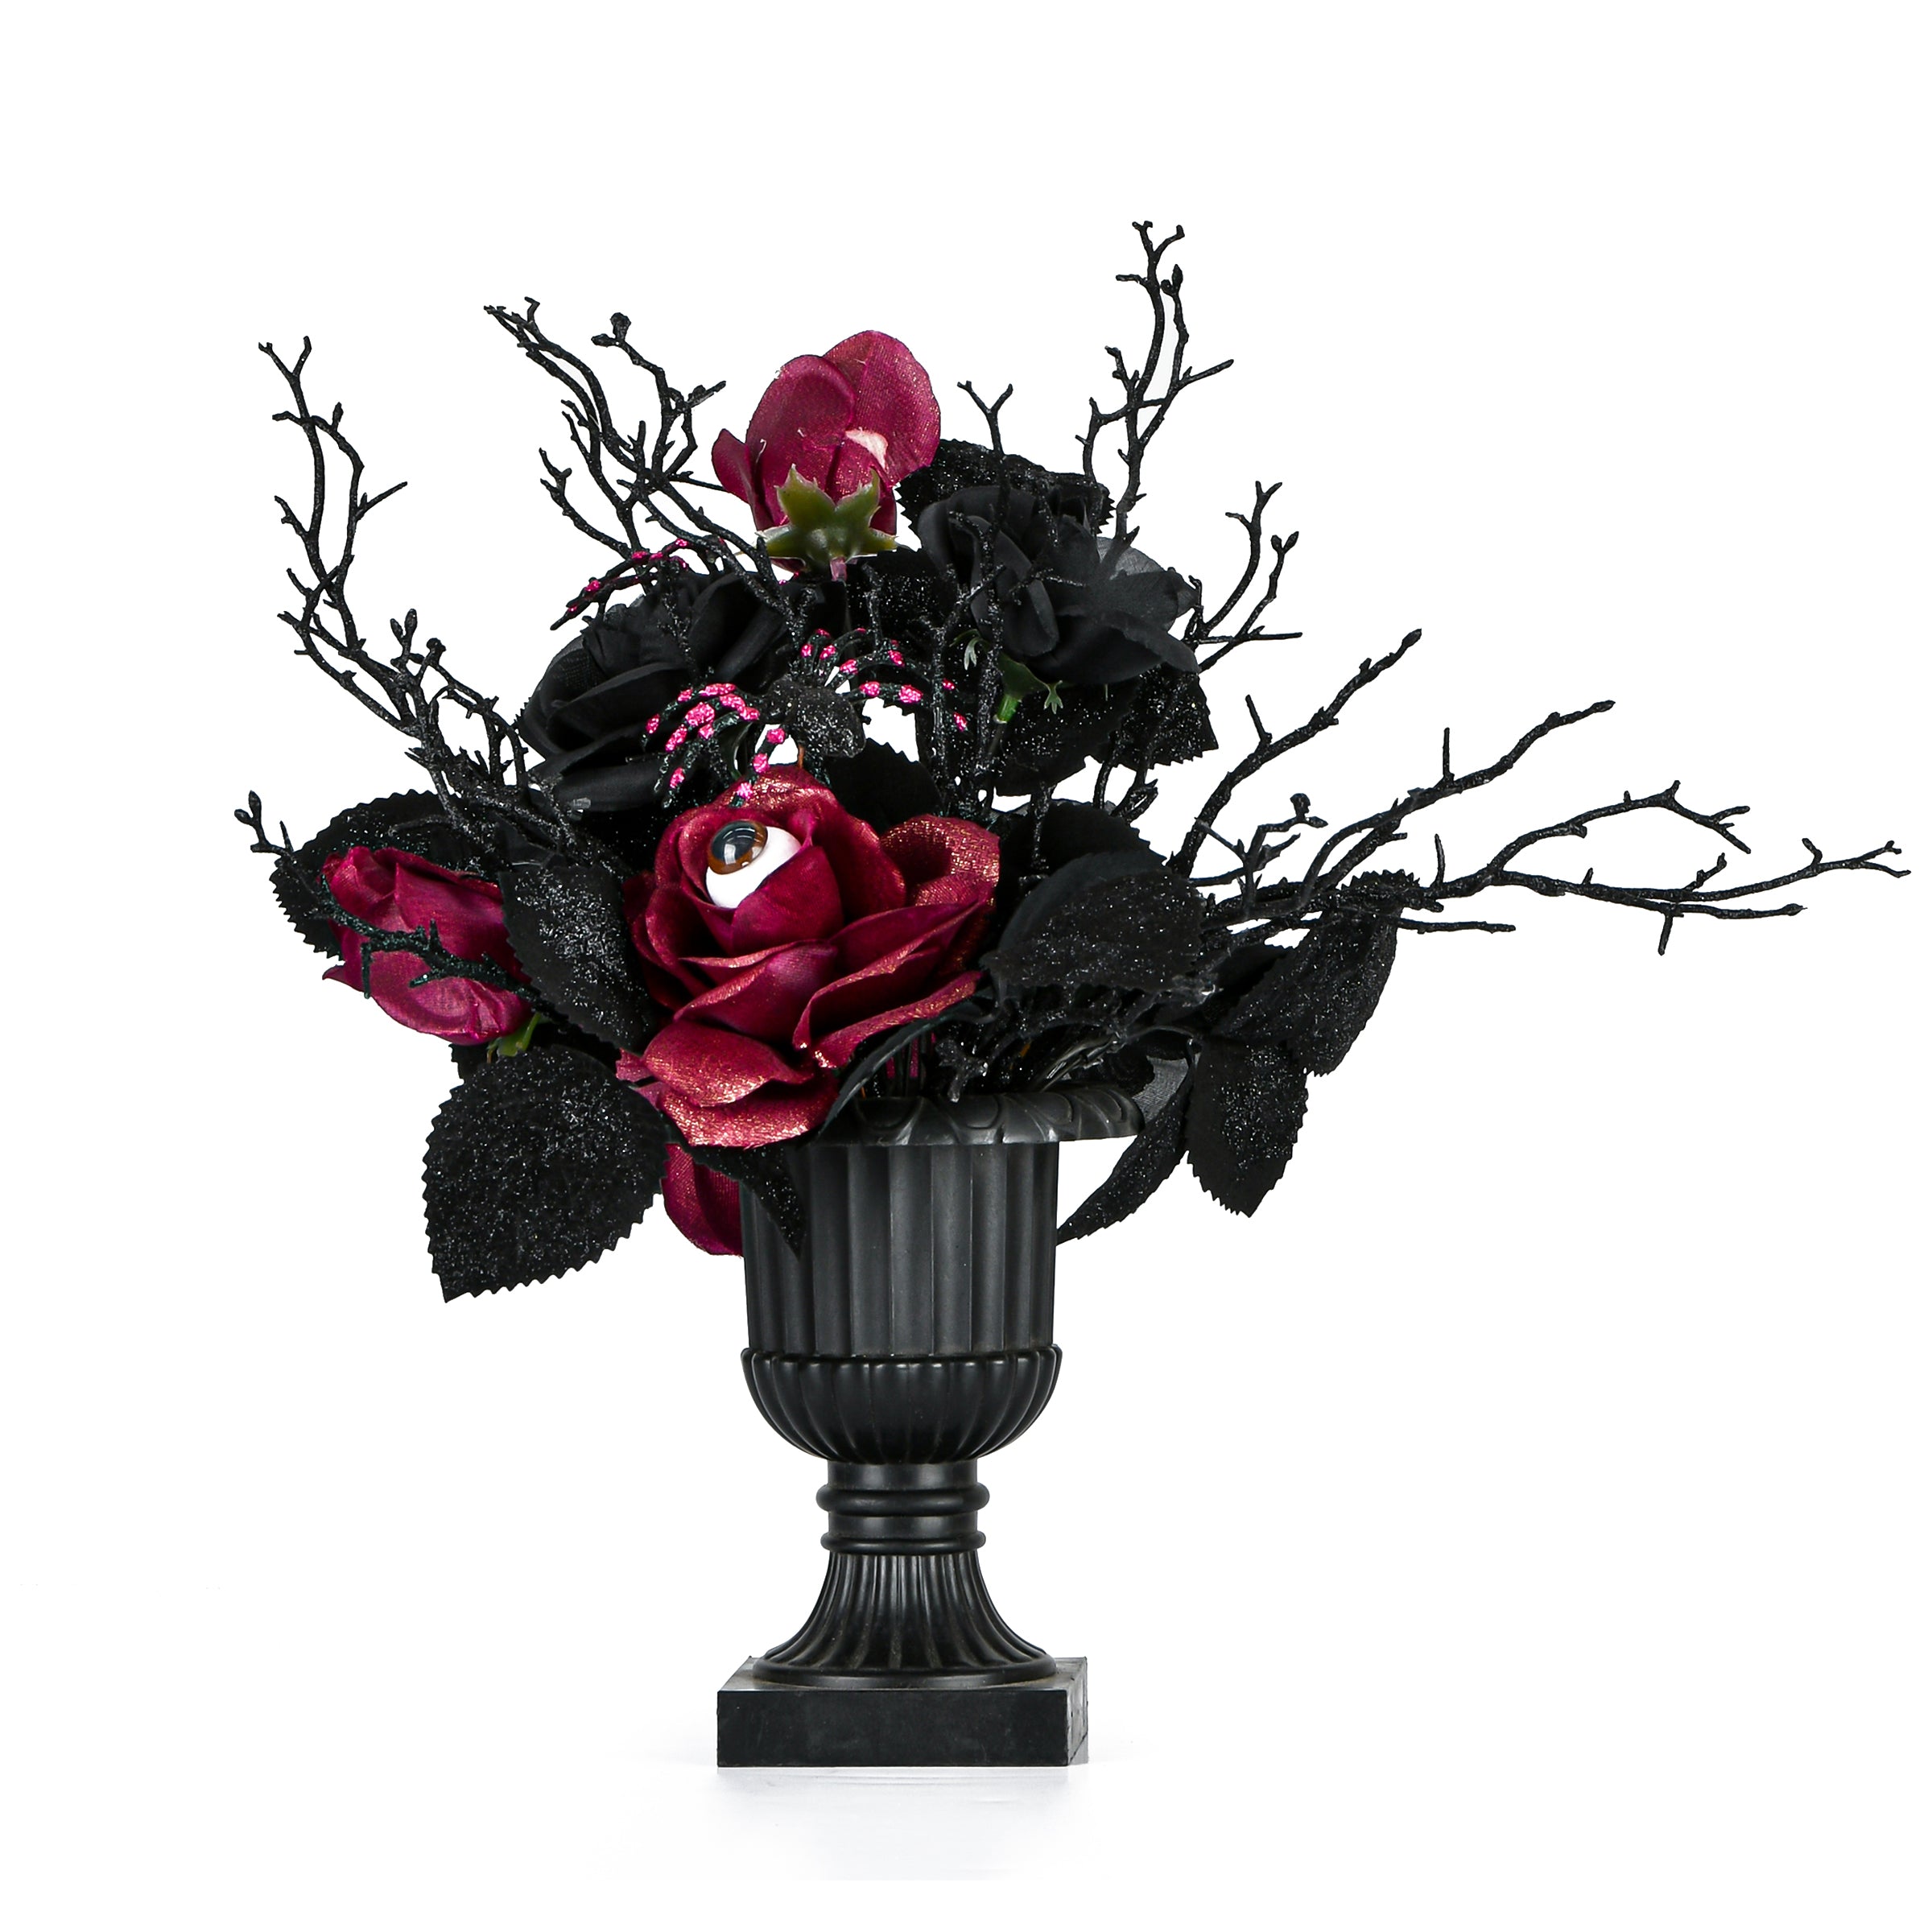 Halloween Artificial Plant Decoration, Black, Decorated with Roses, Flowers, Includes Black Urn, 18 Inches